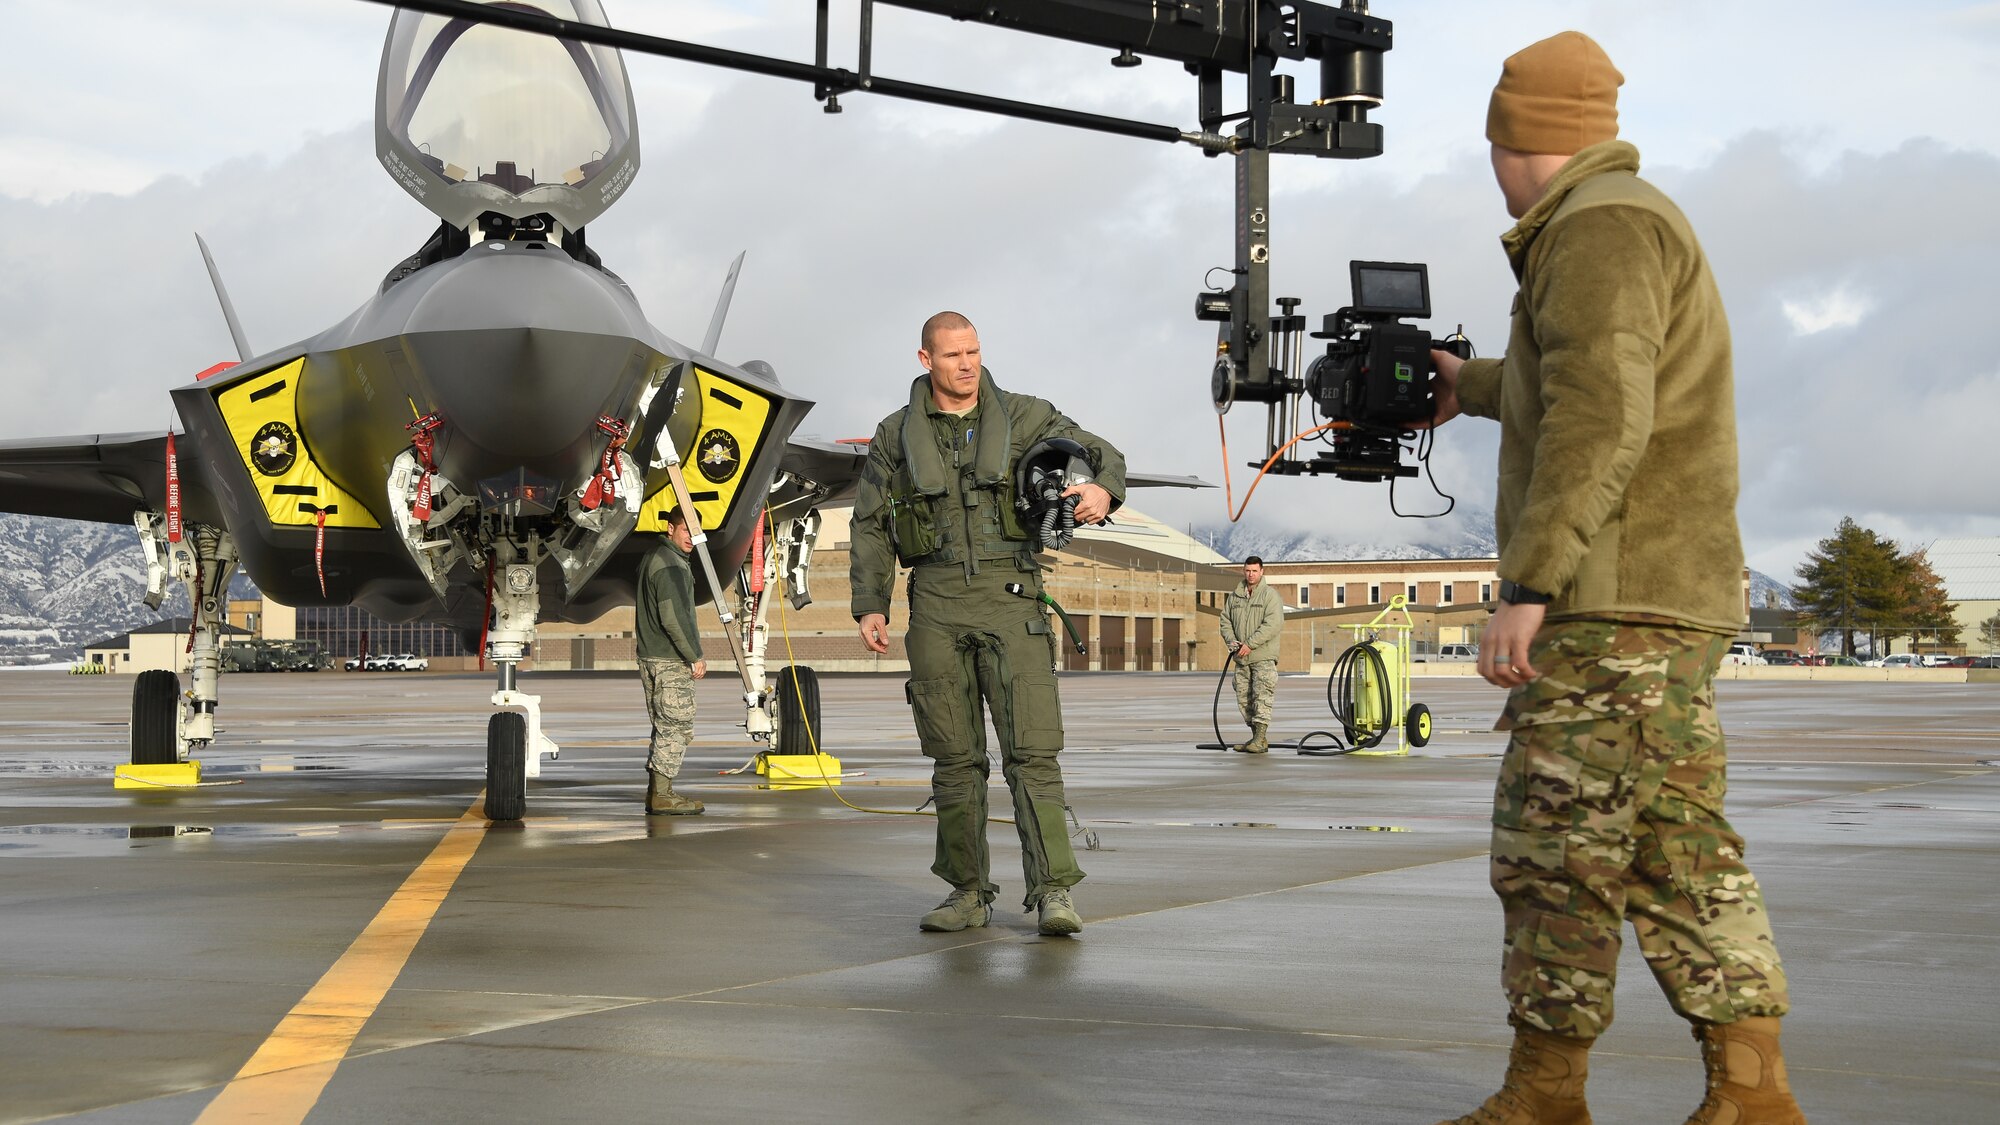 Actor Jonathan Camp known for StartUp, Six, and American Fright Fest during the filming of a public service announcement Jan. 18, 2019, at Hill Air Force Base, Utah. Camp along with Dave Kiley from the television show Diesel Brothers on Discovery Channel will appear in two Air Force ads to promote resilience through mental health, alcohol and drug abuse prevention and treatment, sexual assault prevention and response, family advocacy, and employee assistance. (U.S. Air Force photo by R. Nial Bradshaw)